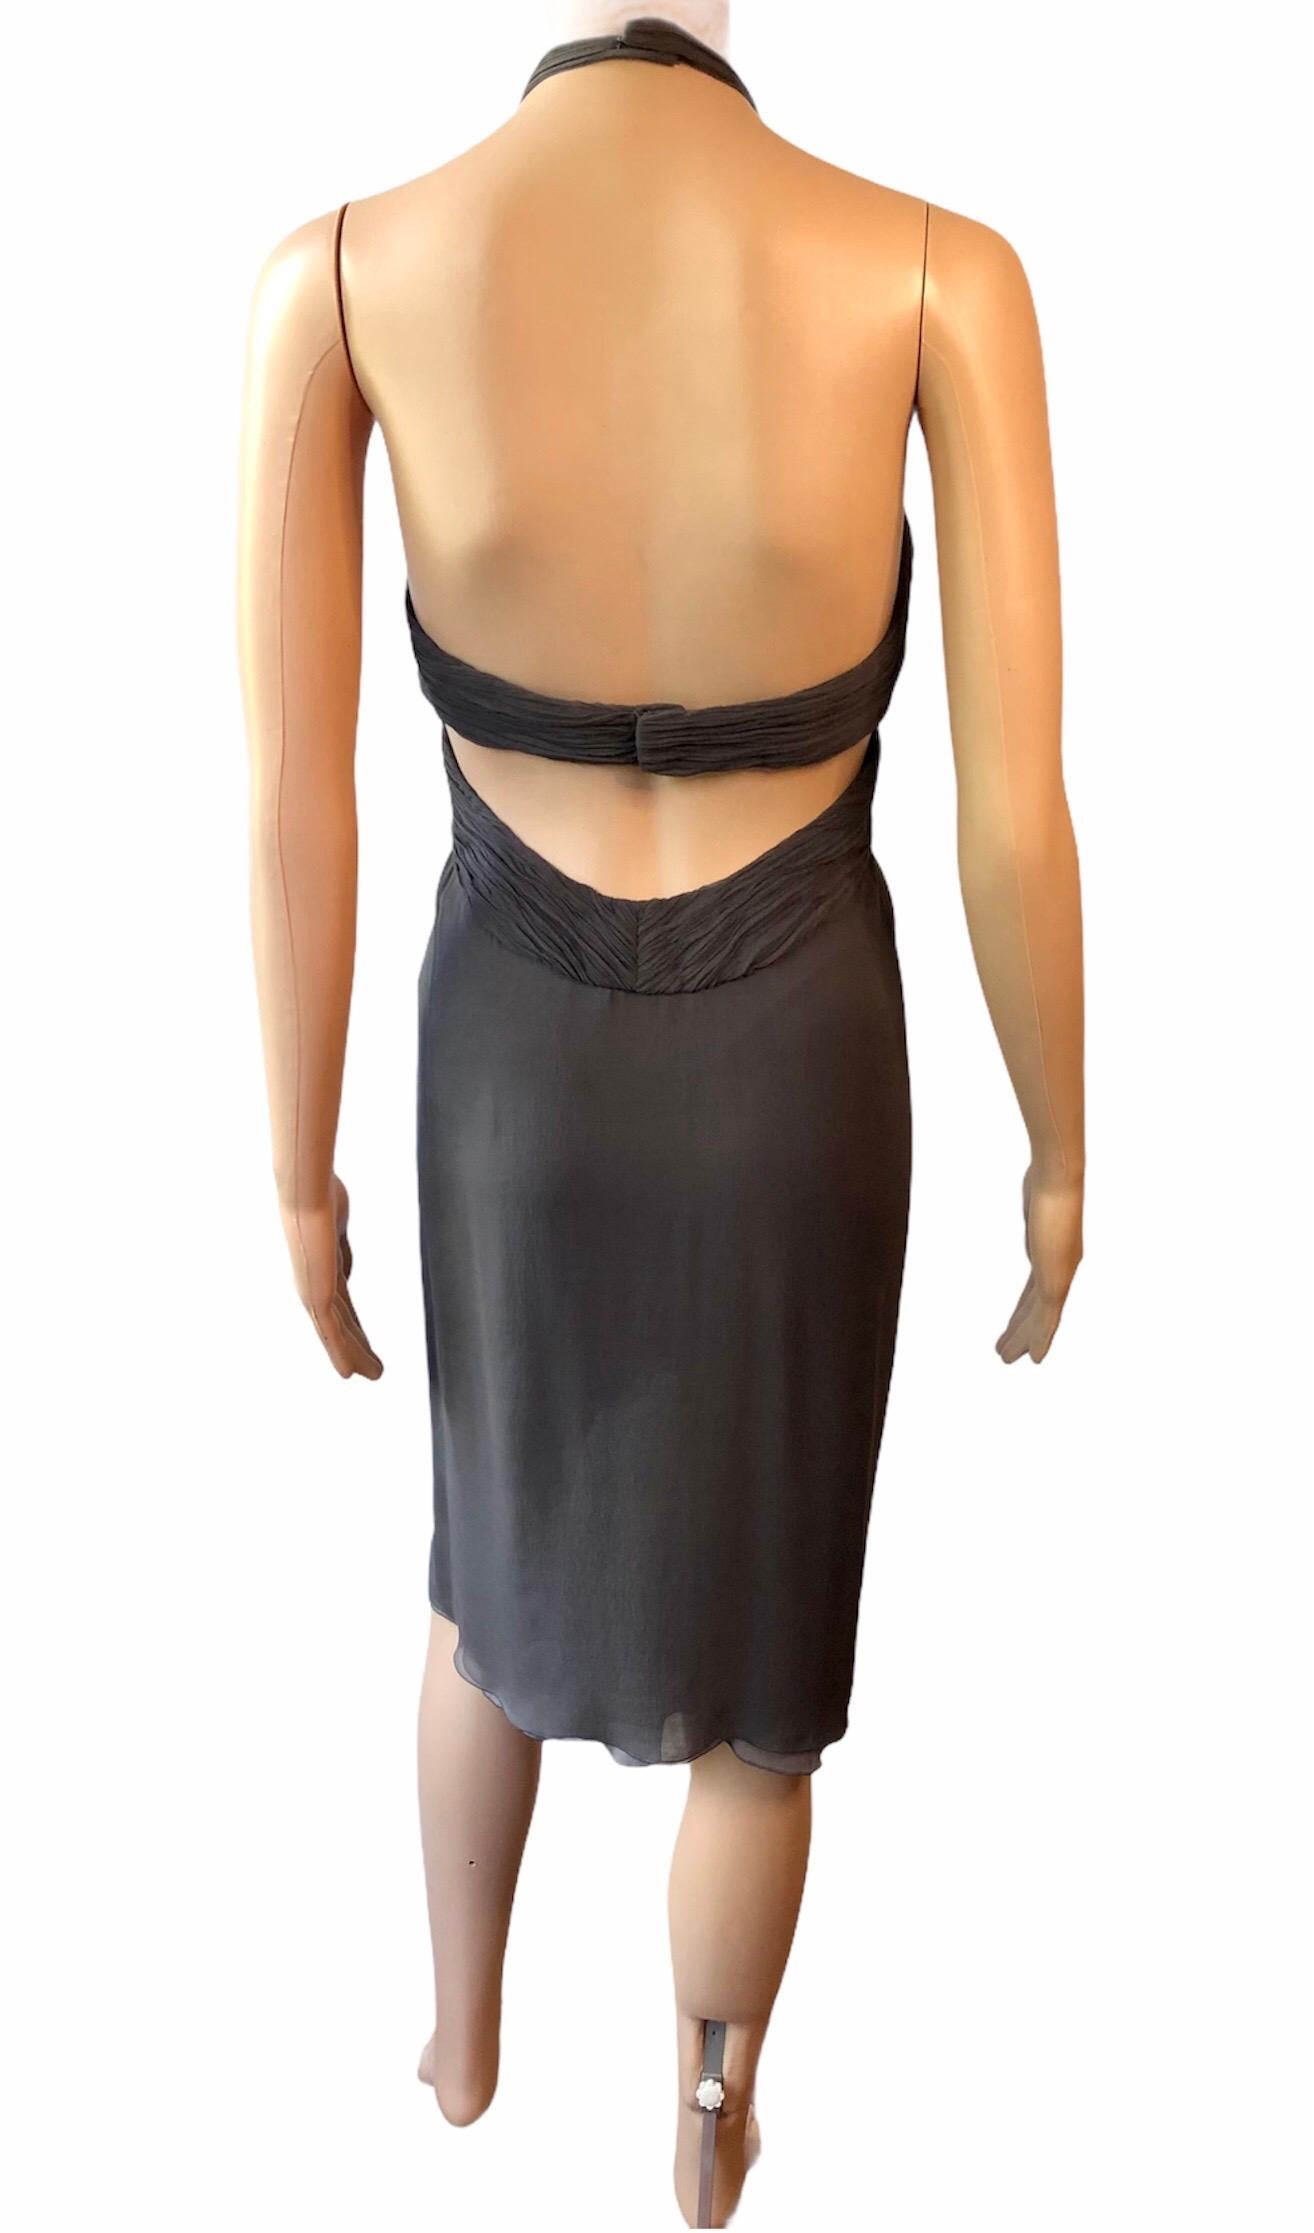 Versace F/W 2006 Runway Bustier Bra Cutout Back Dress In Good Condition For Sale In Naples, FL